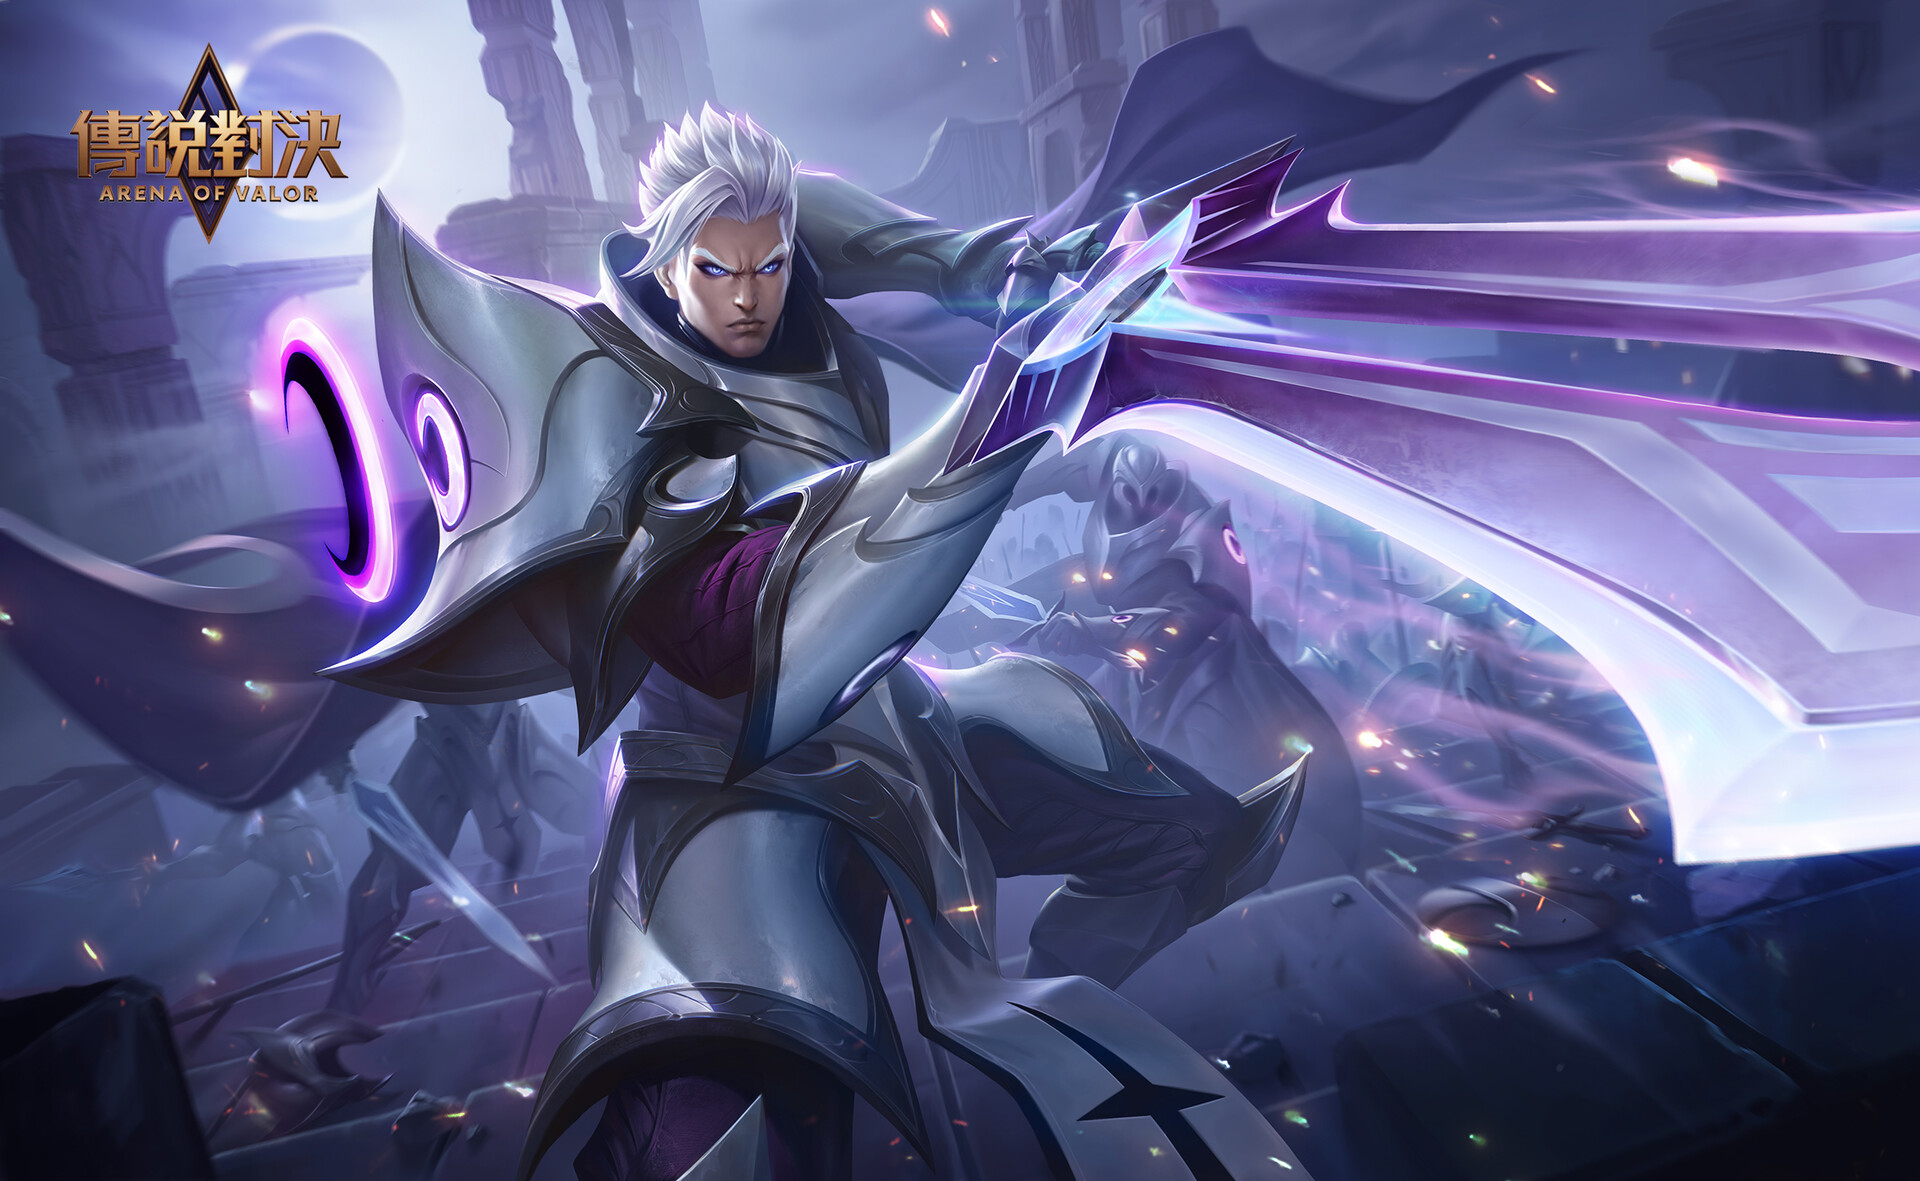 General 1920x1181 Brasenia 1 drawing Arena of Valor men warrior silver hair armor magic weapon sword frown blue eyes purple fighting